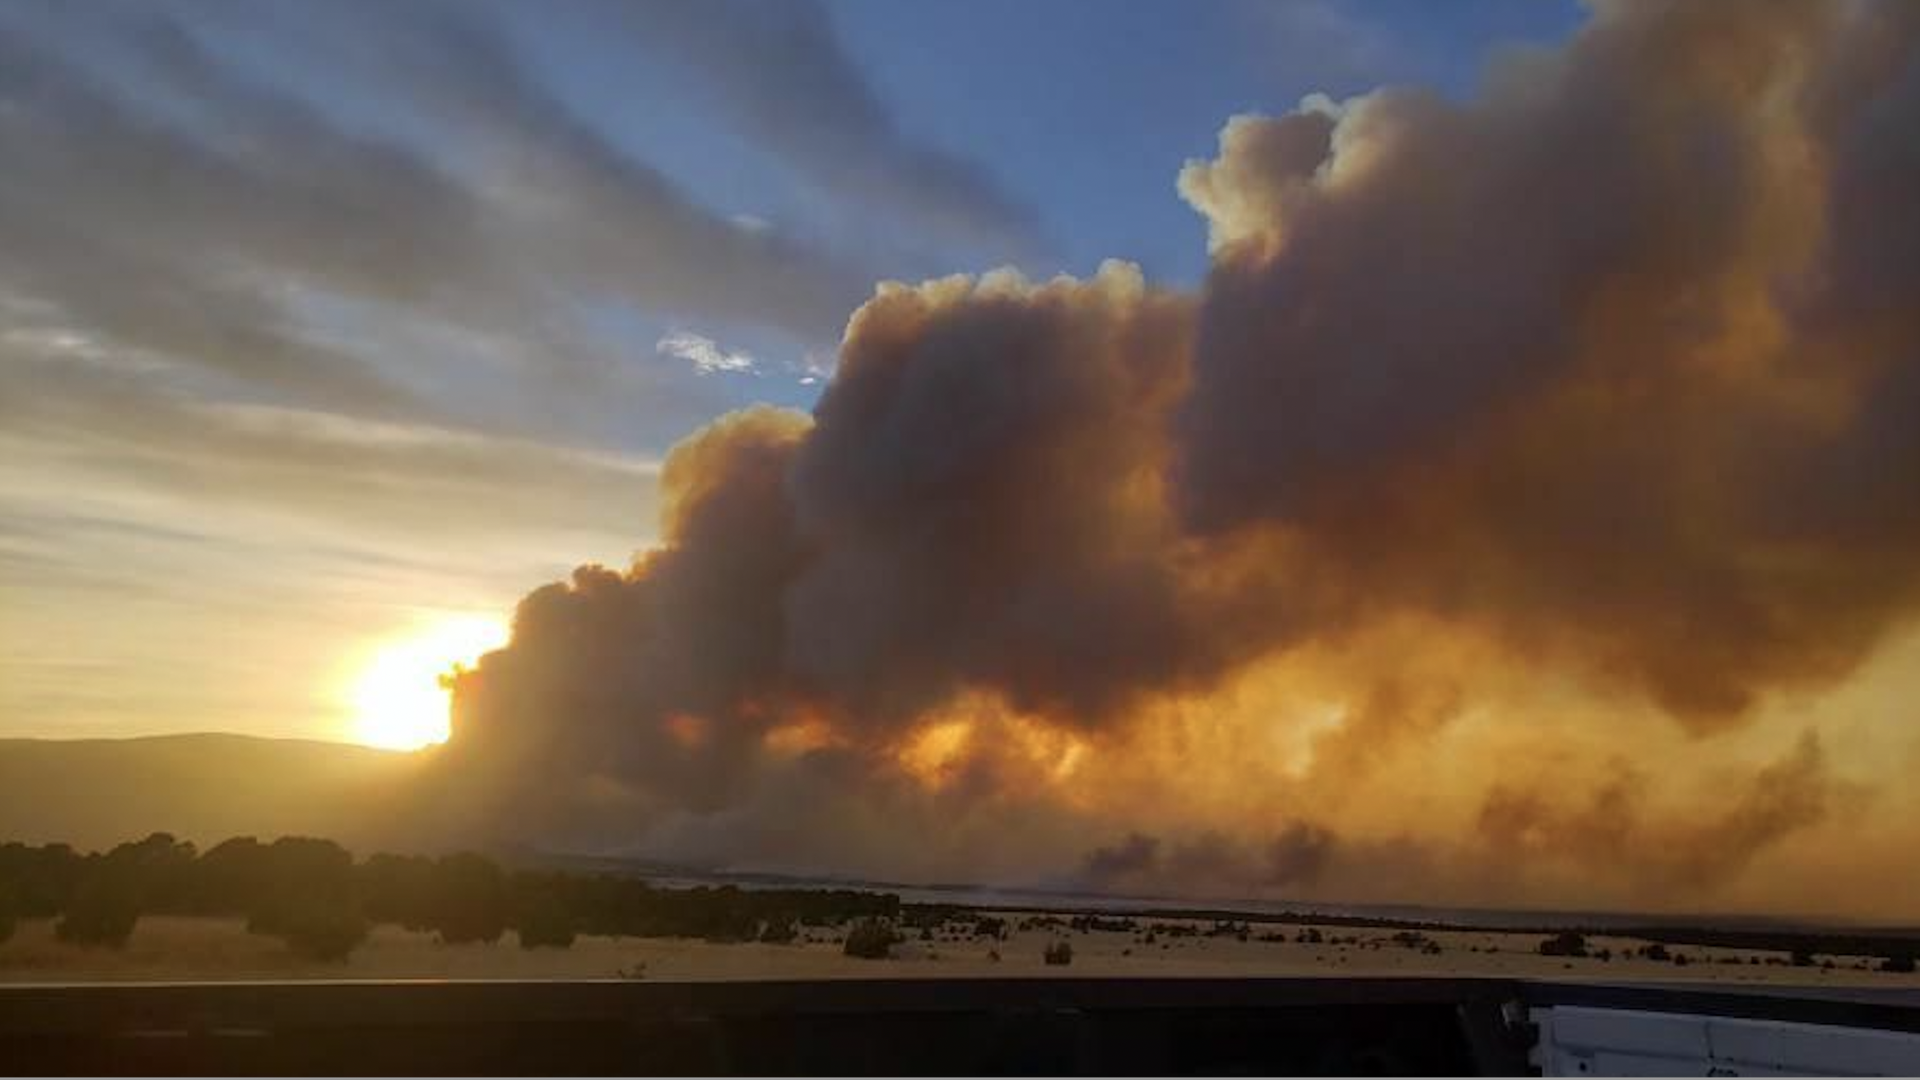 A large plume of smoke is seek from a distance in New Mexico as the sun sets in the background